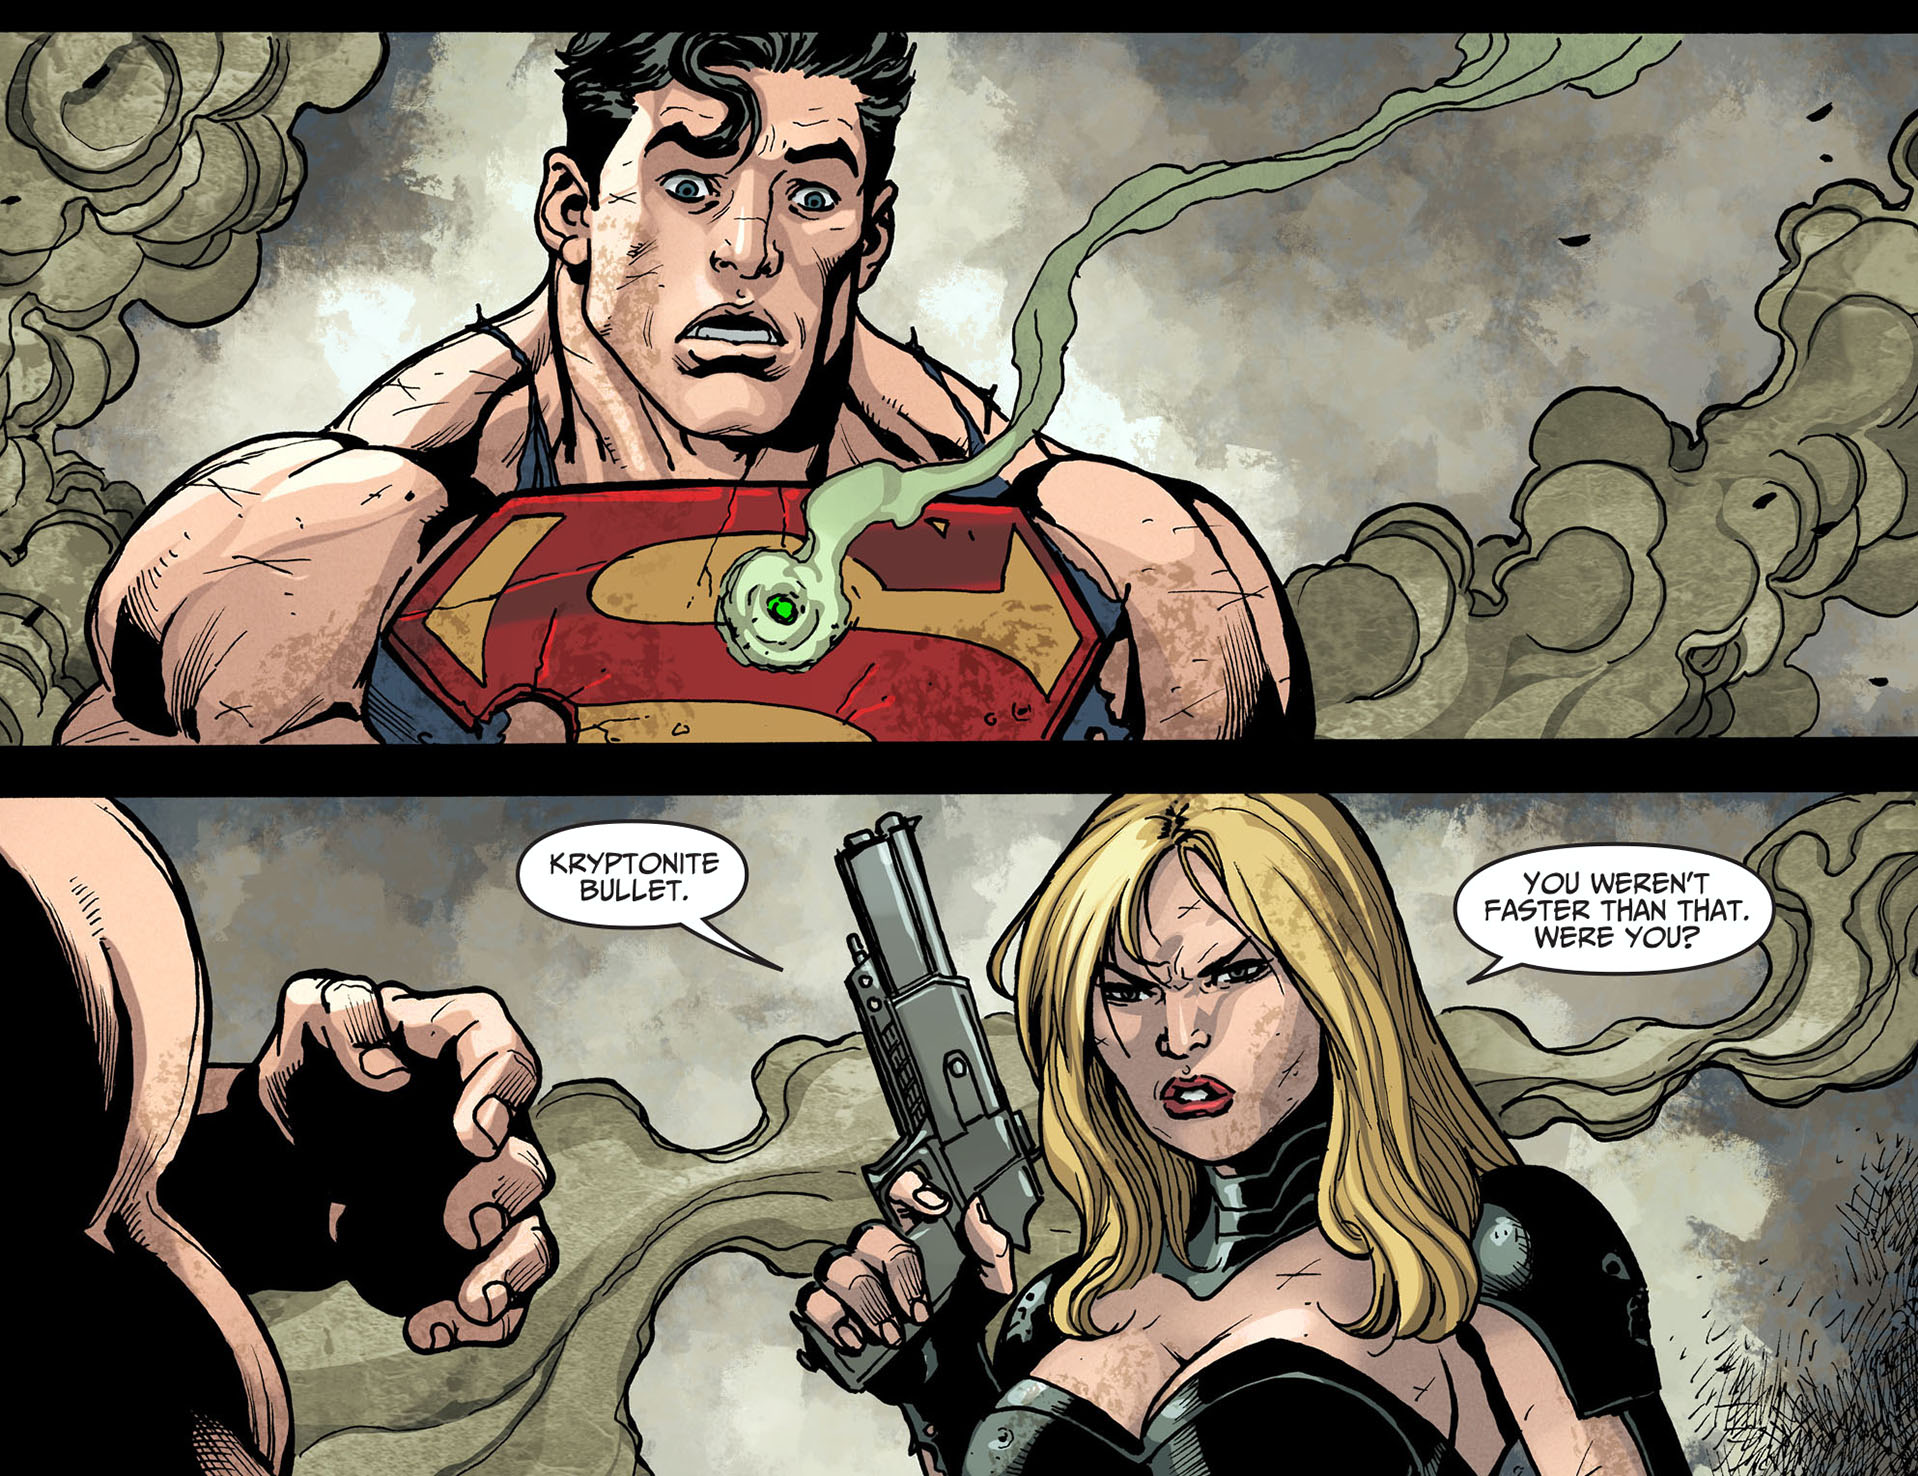   Black Canary surprises Superman by shooting him with a kryptonit...